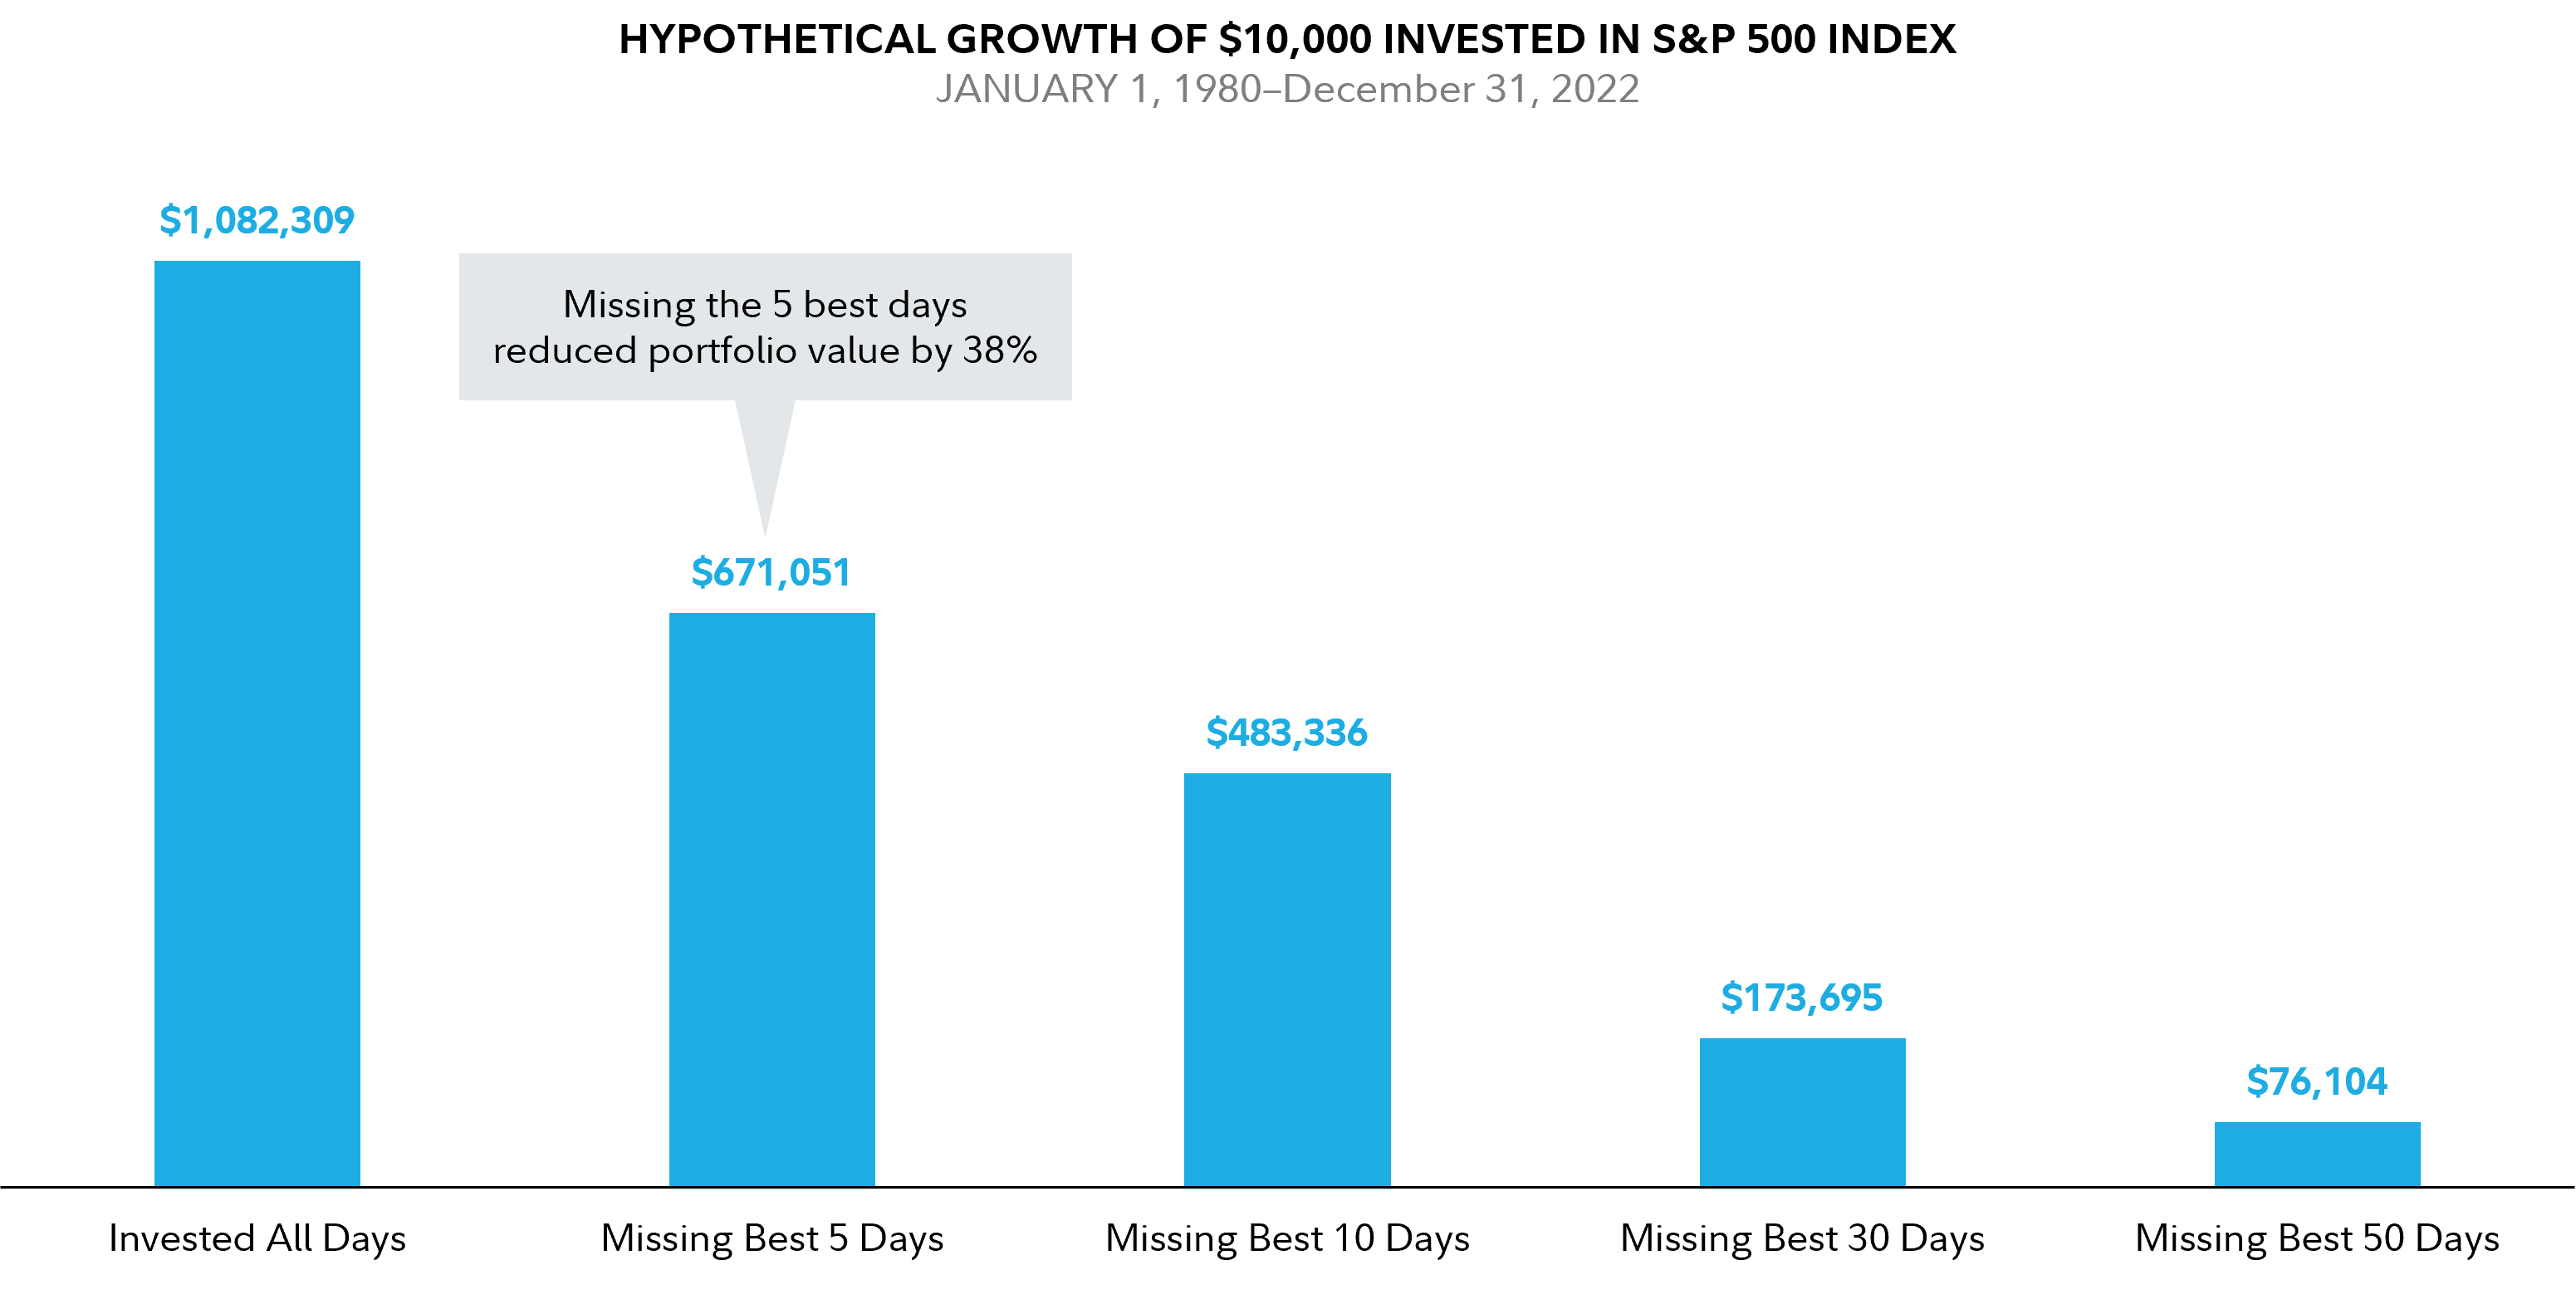 Bar chart shows the hypothetical growth of a ten‐thousand‐dollar investment in the S and P 500 Index from January 1, 1980 through December 31, 2022. If bought and held, the portfolio would have grown to $1,028,309. Missing just the 5 best days in the market would have reduced the portfolio by 38% to $671,051. Missing the best 10 days would have reduced the value to $483,336, missing the best 30 days would have reduced the value to $173,695, and the missing the best 50 days would have reduced the value to $76,104. This shows how missing even as few as five up days can have a long‐term impact on performance.